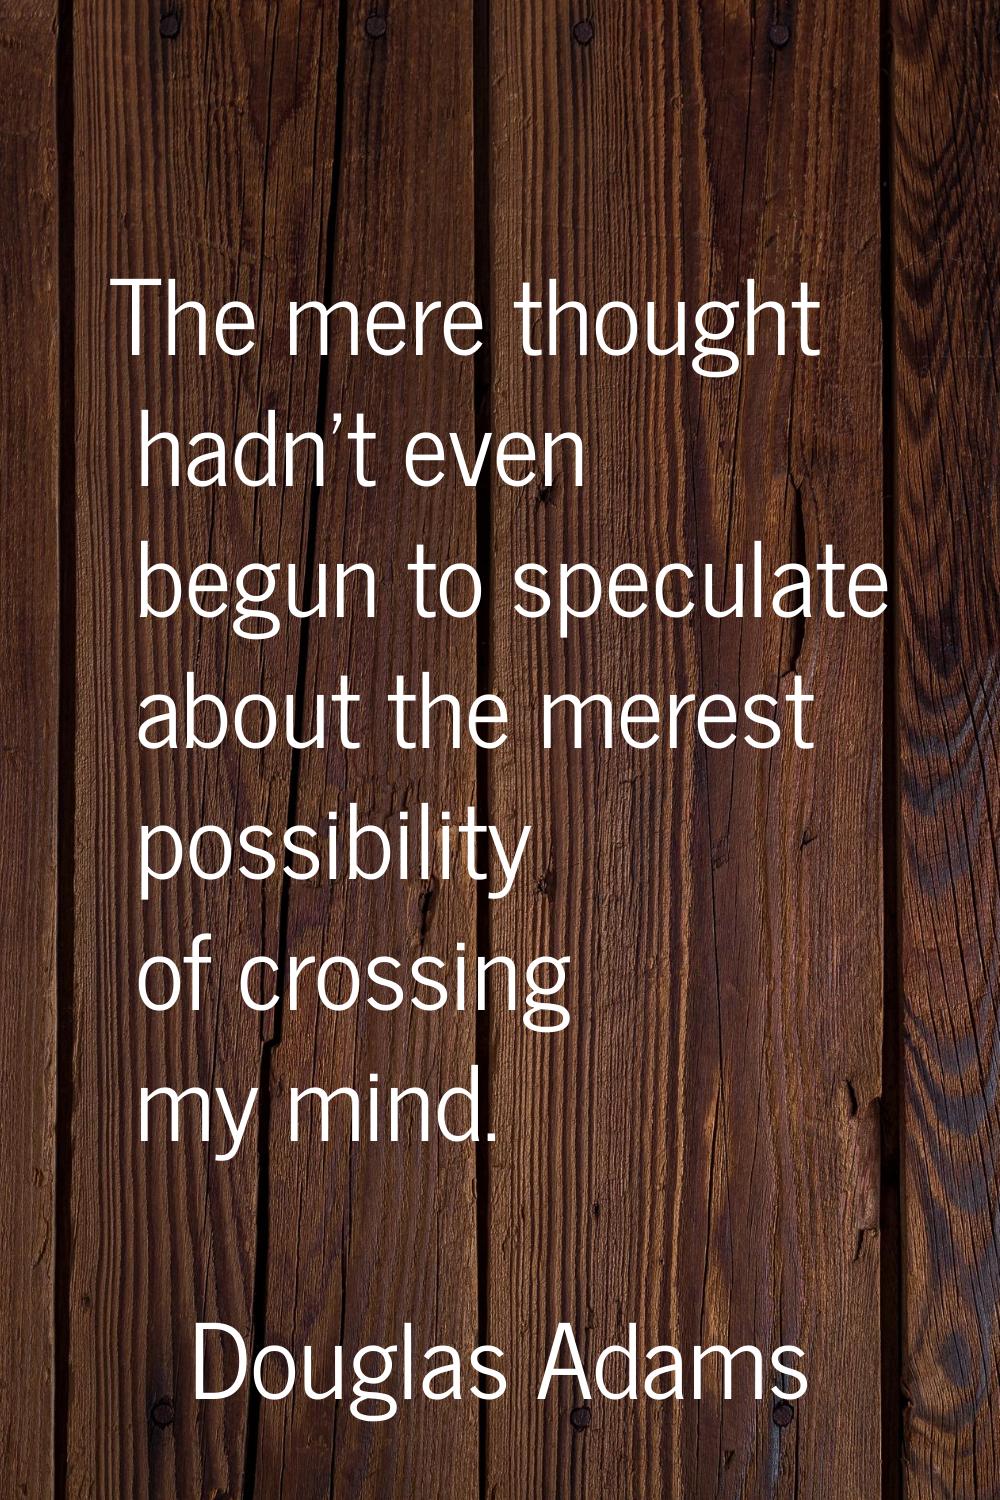 The mere thought hadn't even begun to speculate about the merest possibility of crossing my mind.